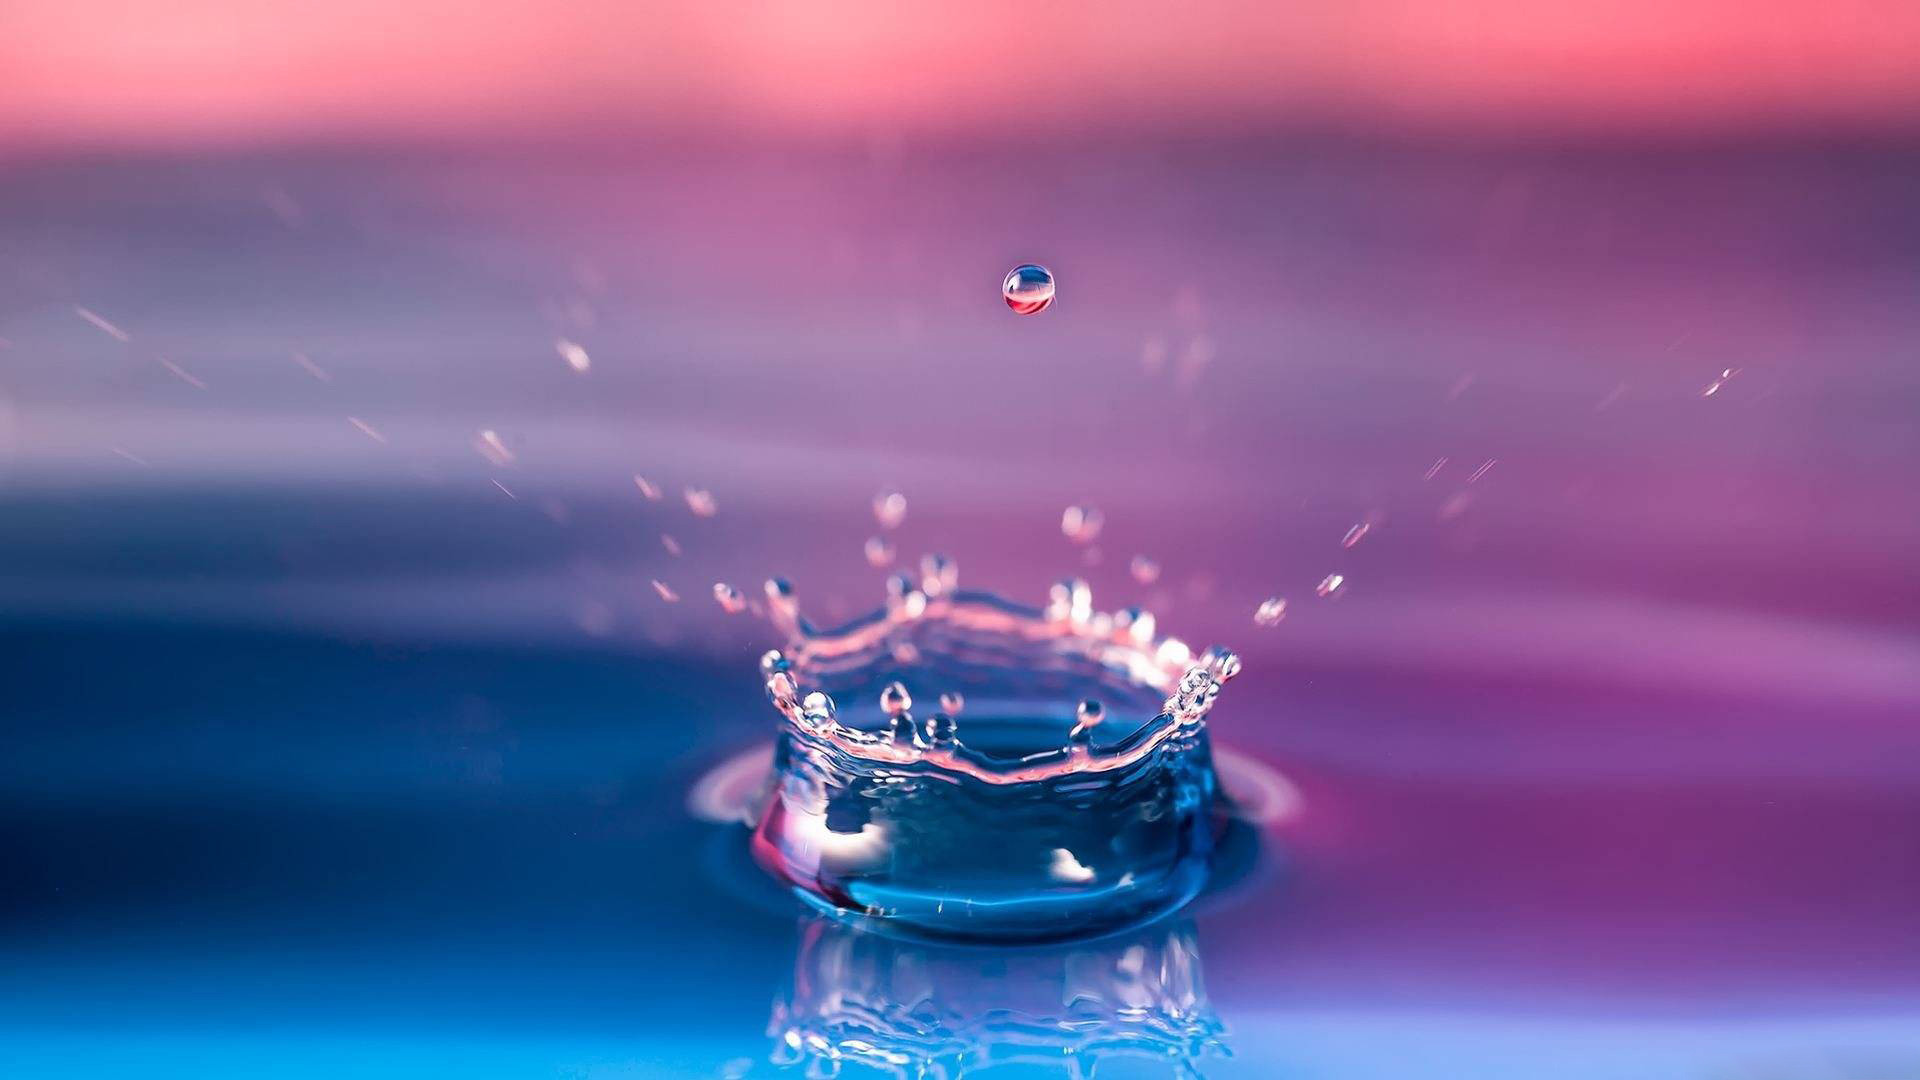 1920x1080 Water drop wallpaper Gallery| Beautiful and Interesting  Images,Vectors,Coloring,Cliparts |Free Hd wallpapers